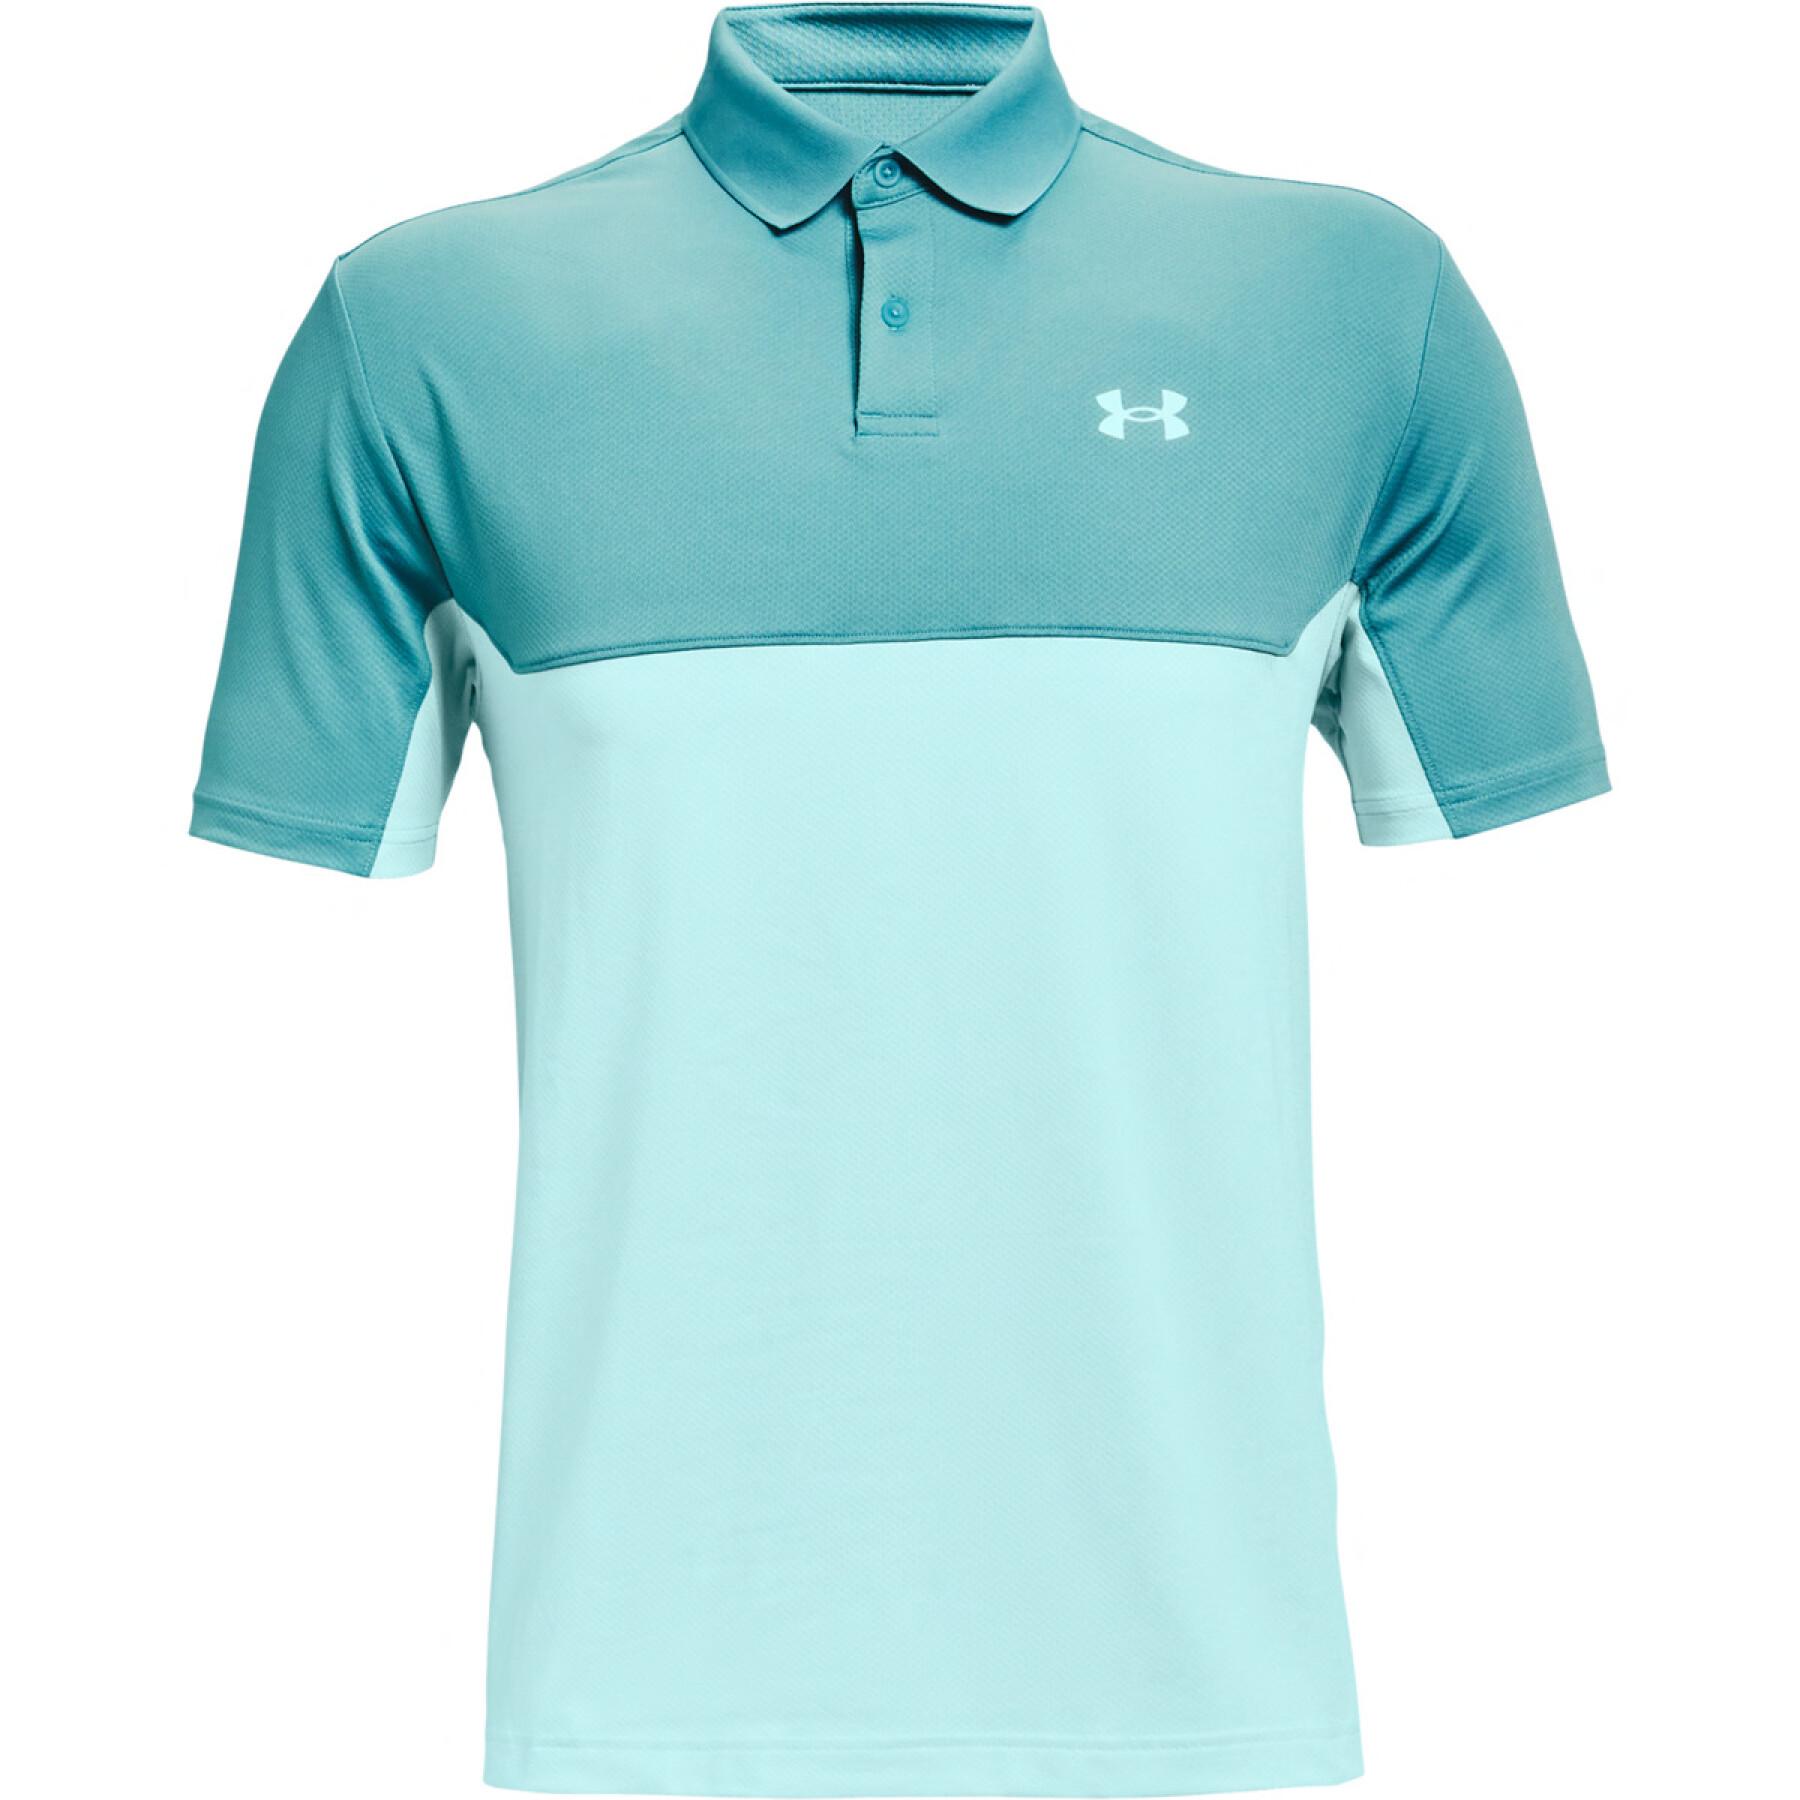 Under Armour Unisex Kids Performance Polo 2.0 Polo T Shirt with Short Sleeves Short Sleeve Polo Shirt with Sun Protection